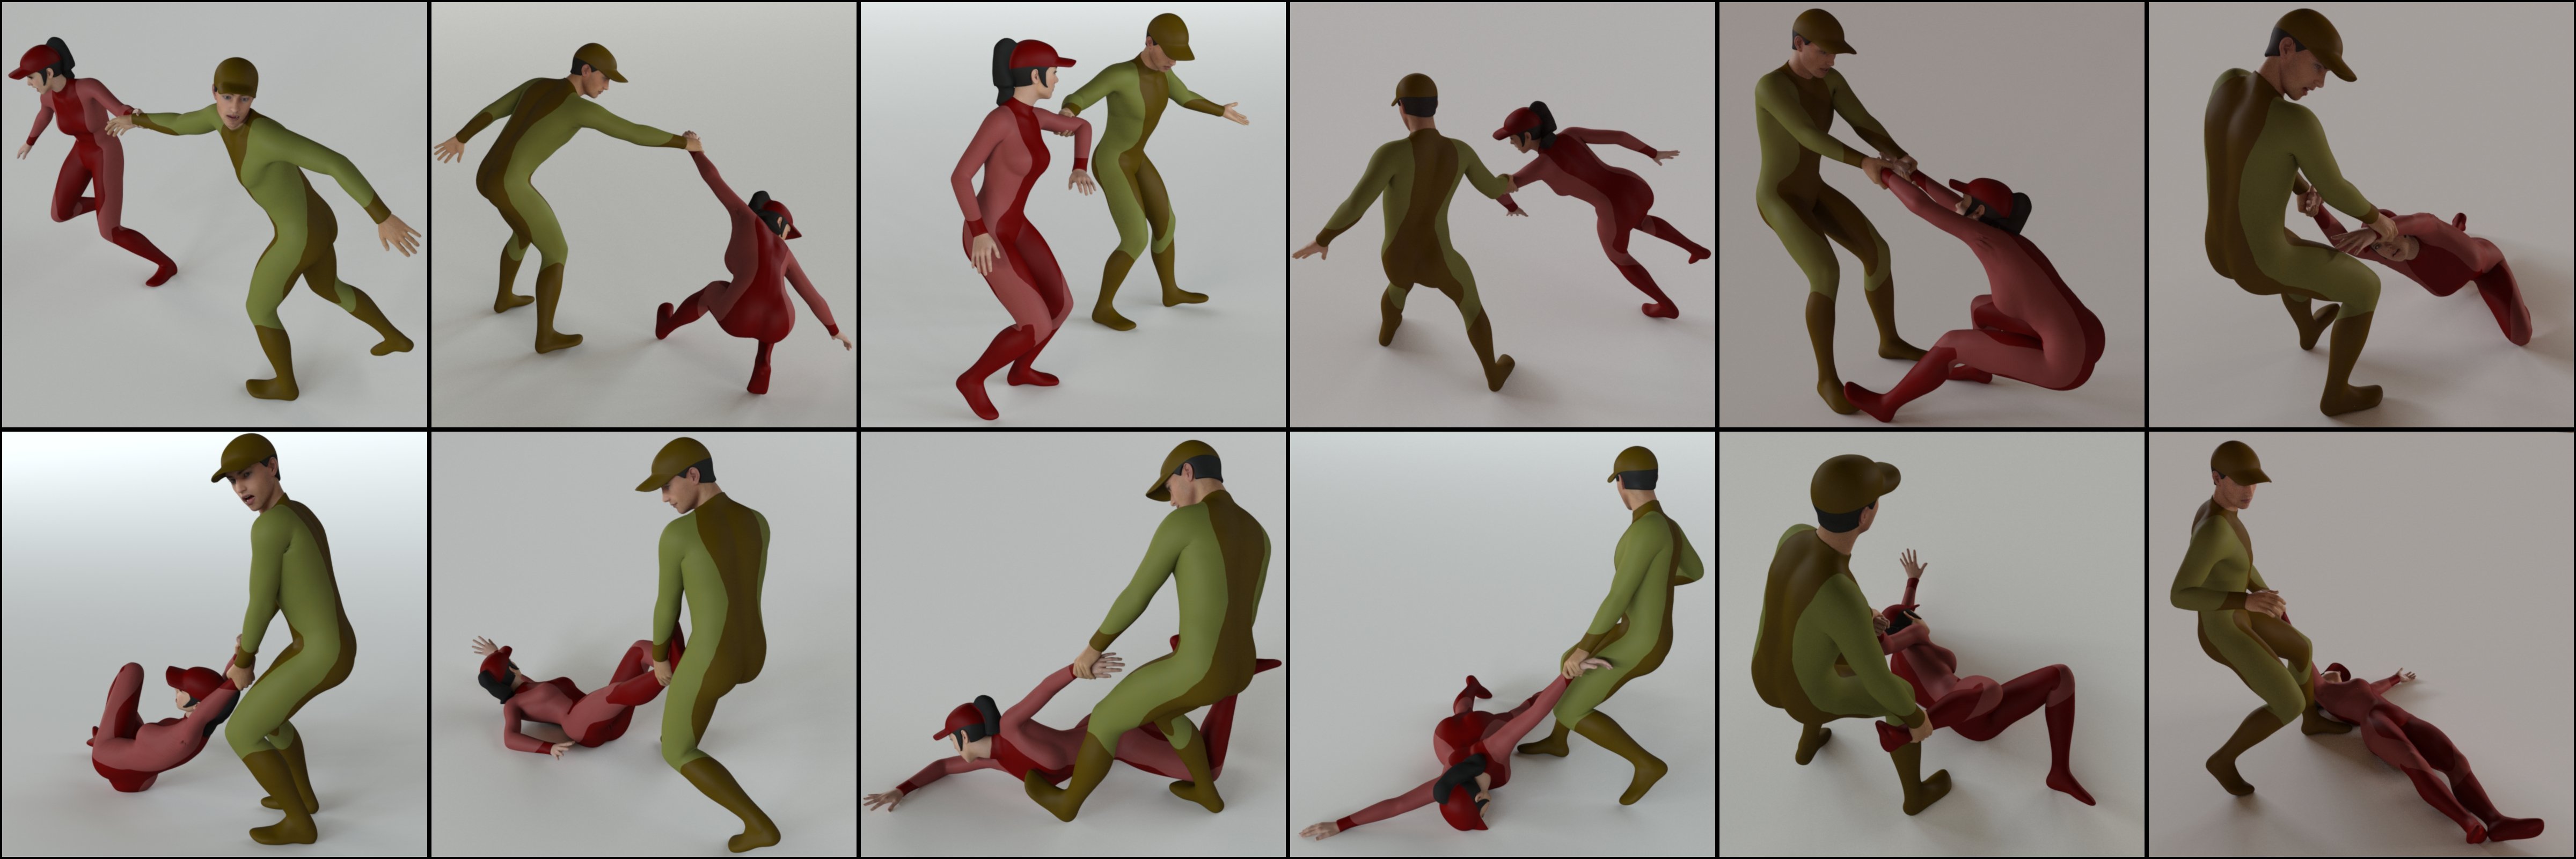 Dragging People Poses Volume 2 for Genesis 8 by: atrilliongames, 3D Models by Daz 3D